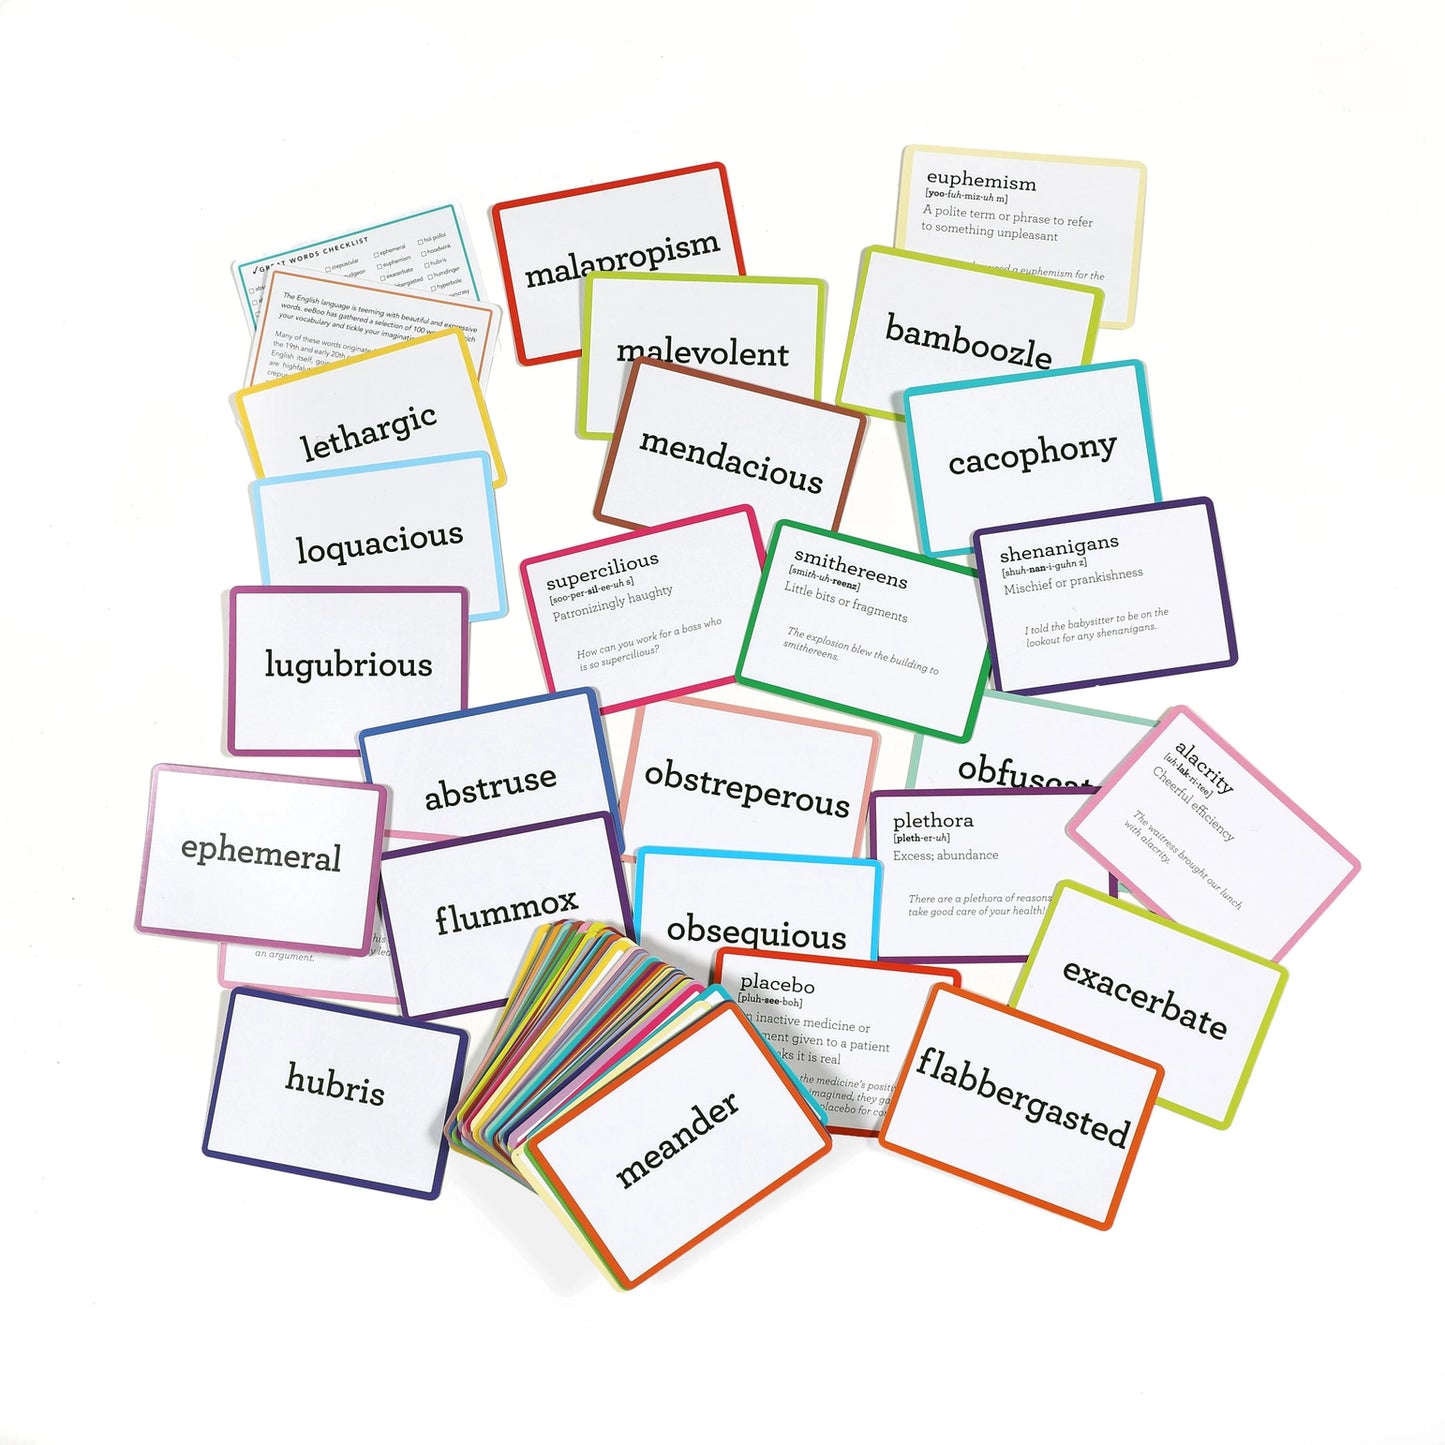 100 Great Words Flashcards